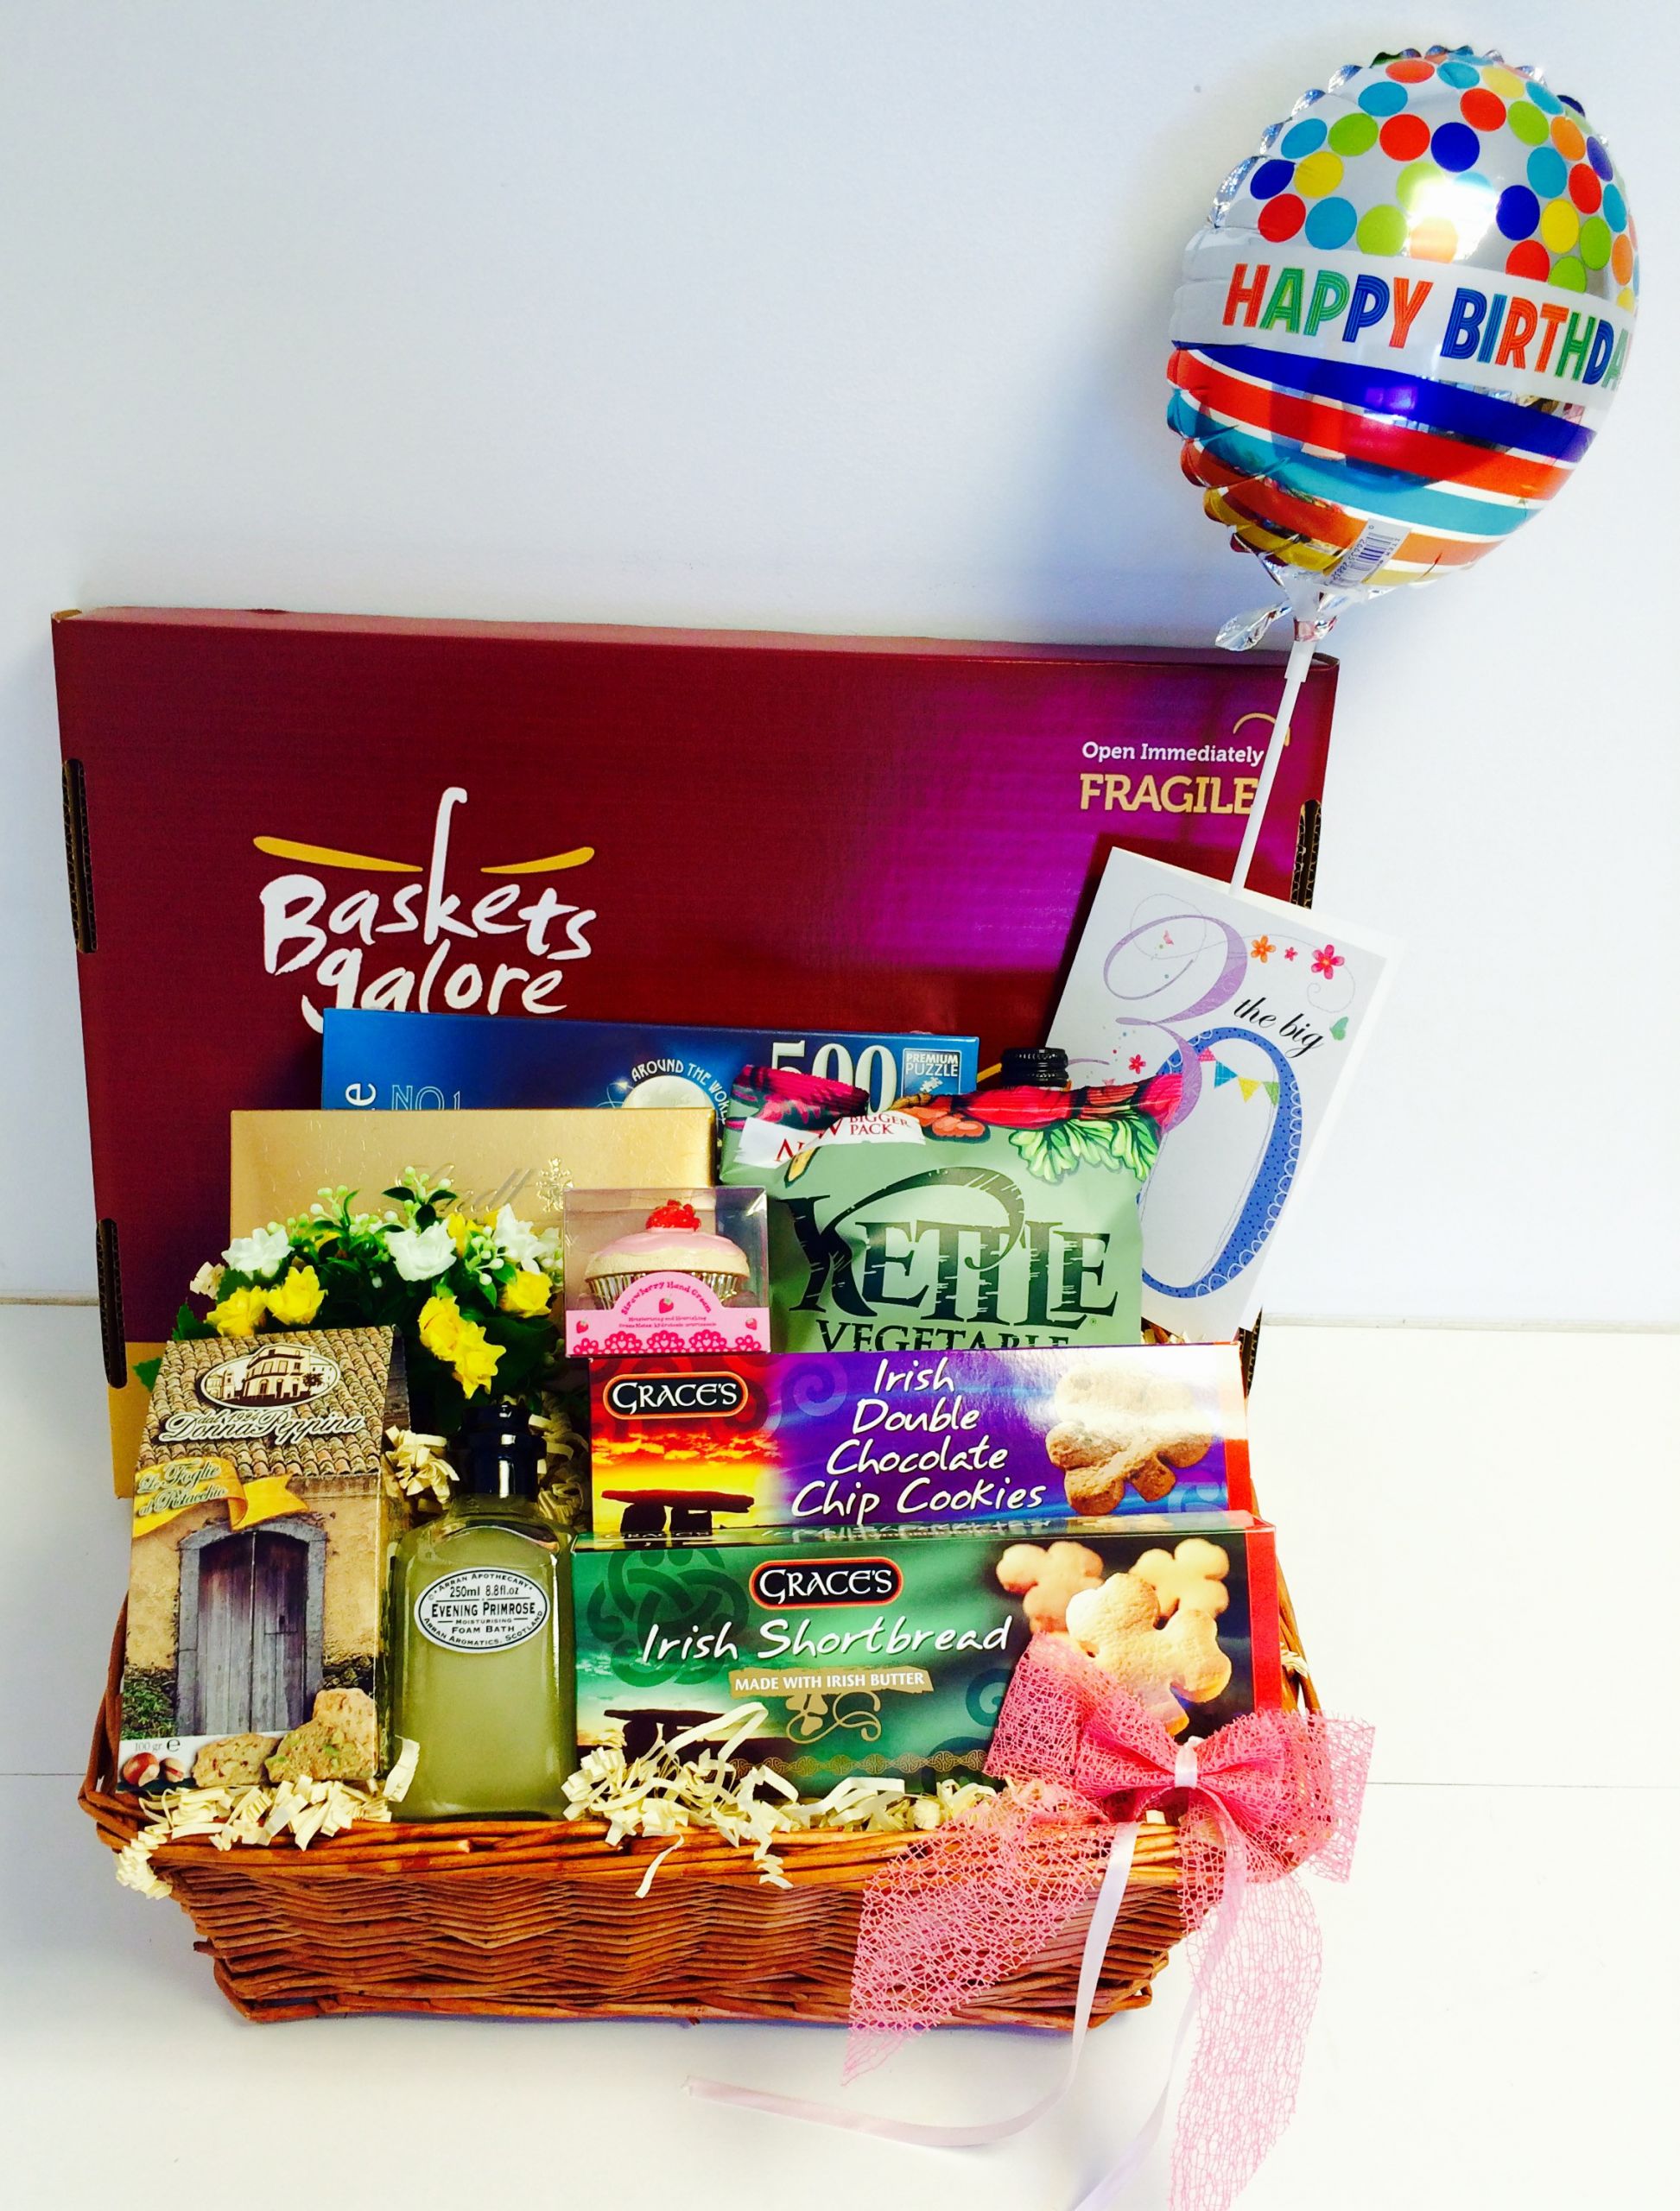 Gift Basket Ideas For Birthdays
 Be Inspired Create Your Own Birthday Basket Baskets Galore